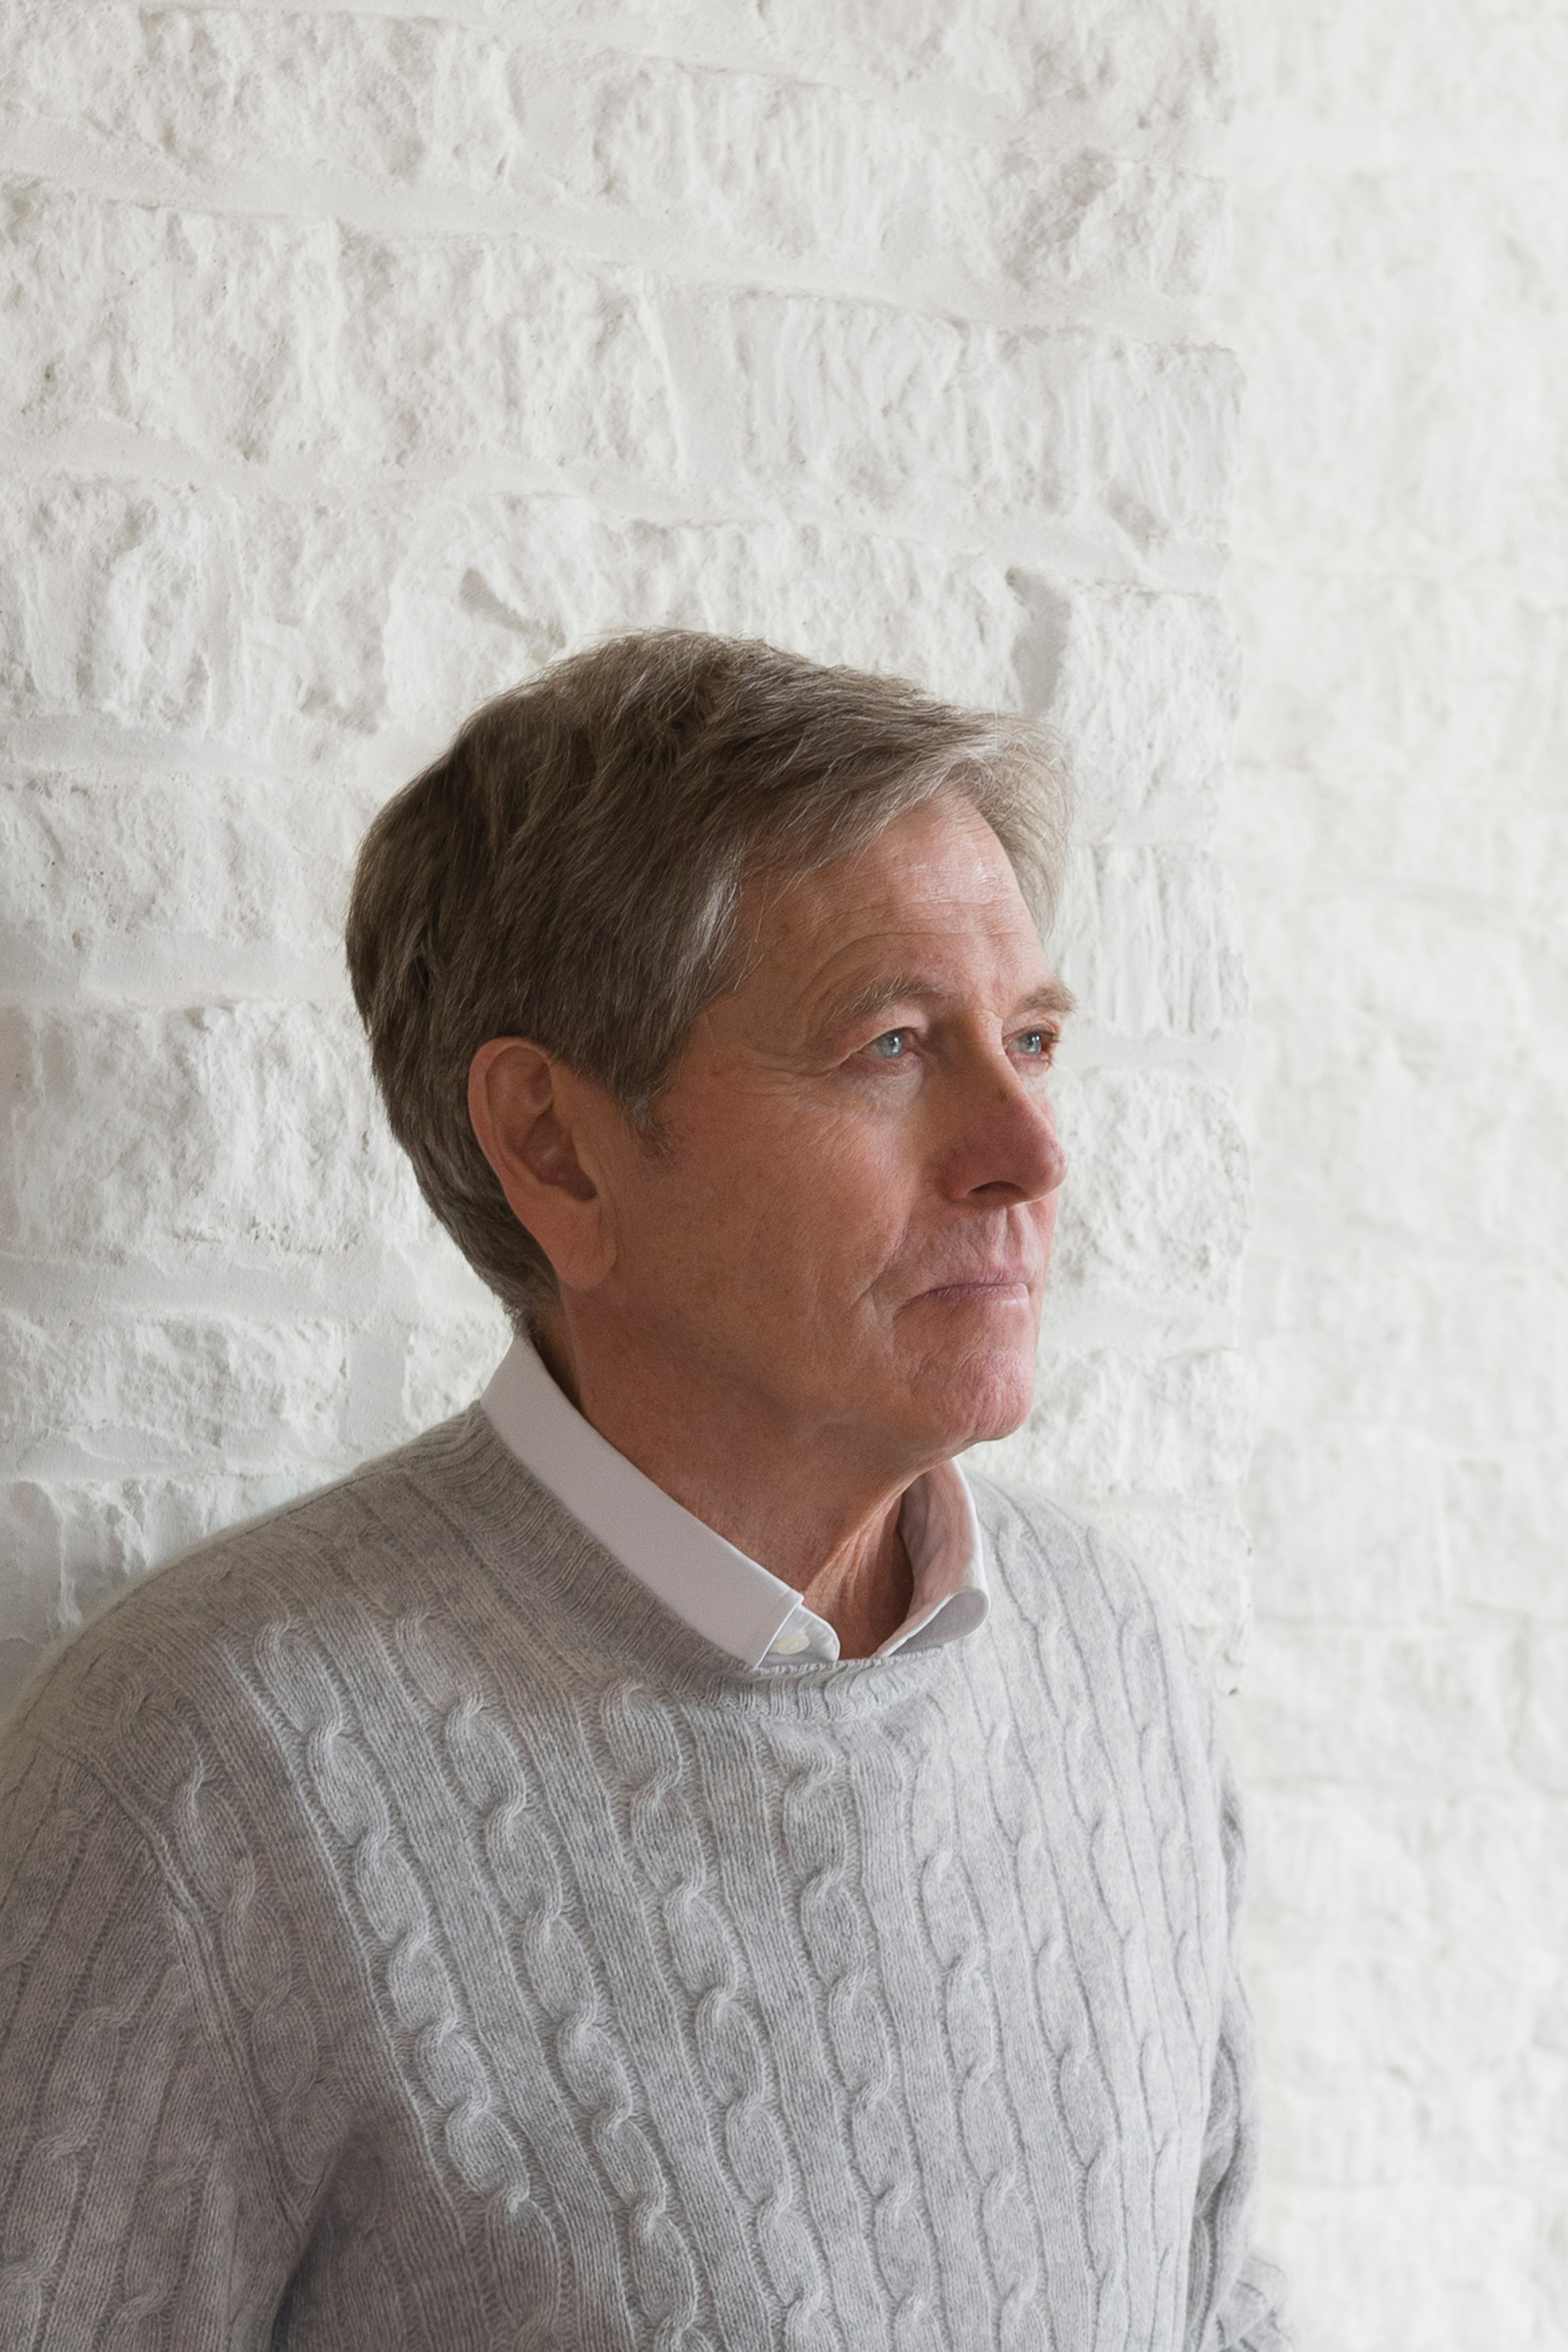 "I am irrational and the work stops me going mad" says John Pawson in Dezeen's latest podcast